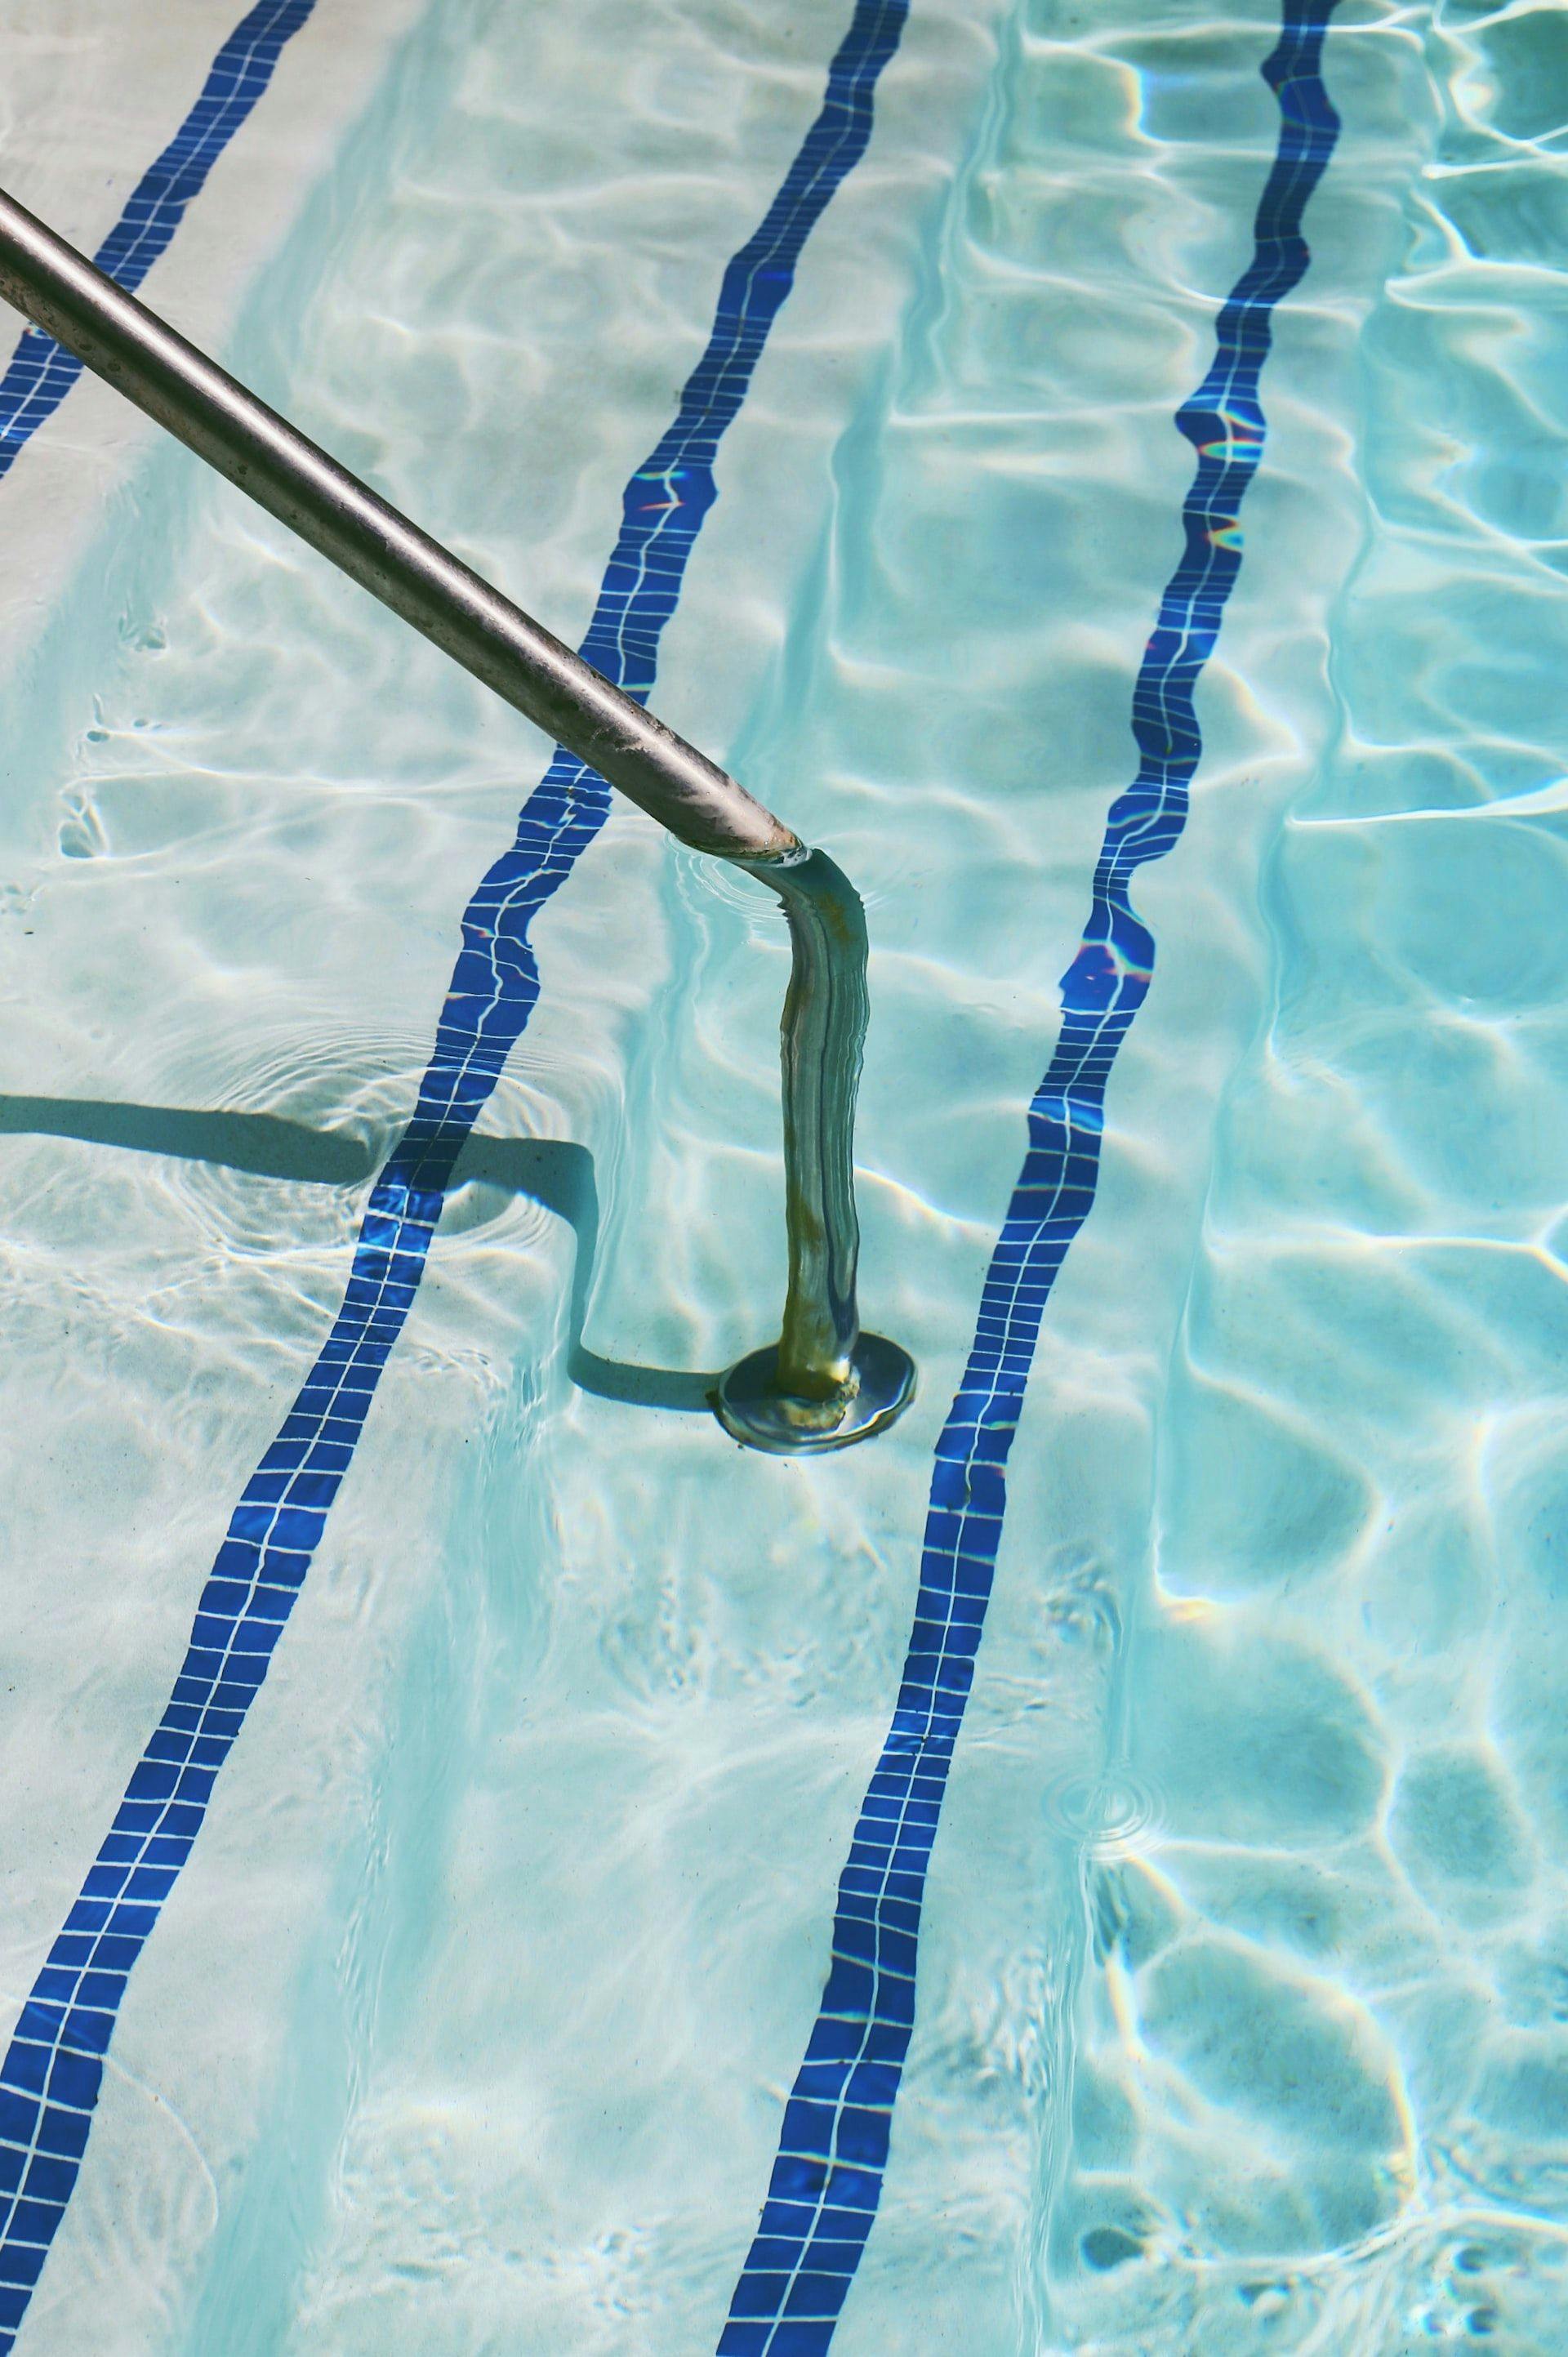 Outdoor public pool in Grevenmacher closes in early September